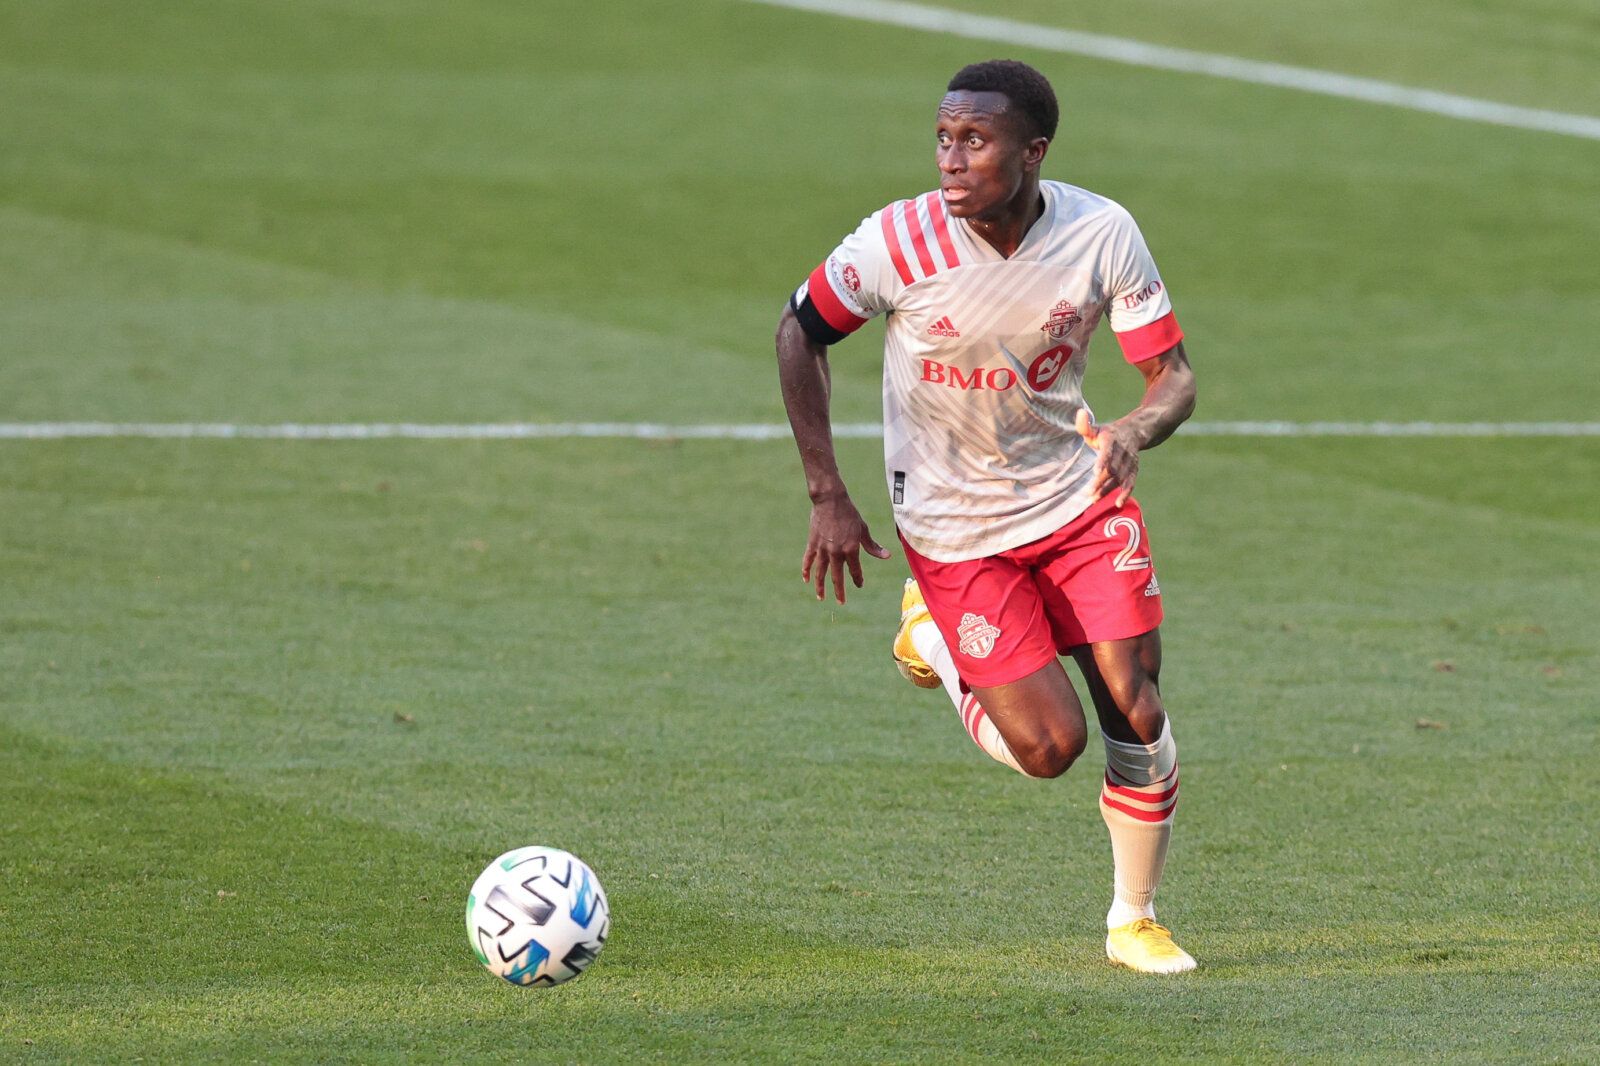 Nov 8, 2020; Harrison, New Jersey, USA; Toronto FC midfielder Richie Laryea (22) controls the ball against the New York Red Bulls during the first half at Red Bull Arena. Mandatory Credit: Vincent Carchietta-USA TODAY Sports